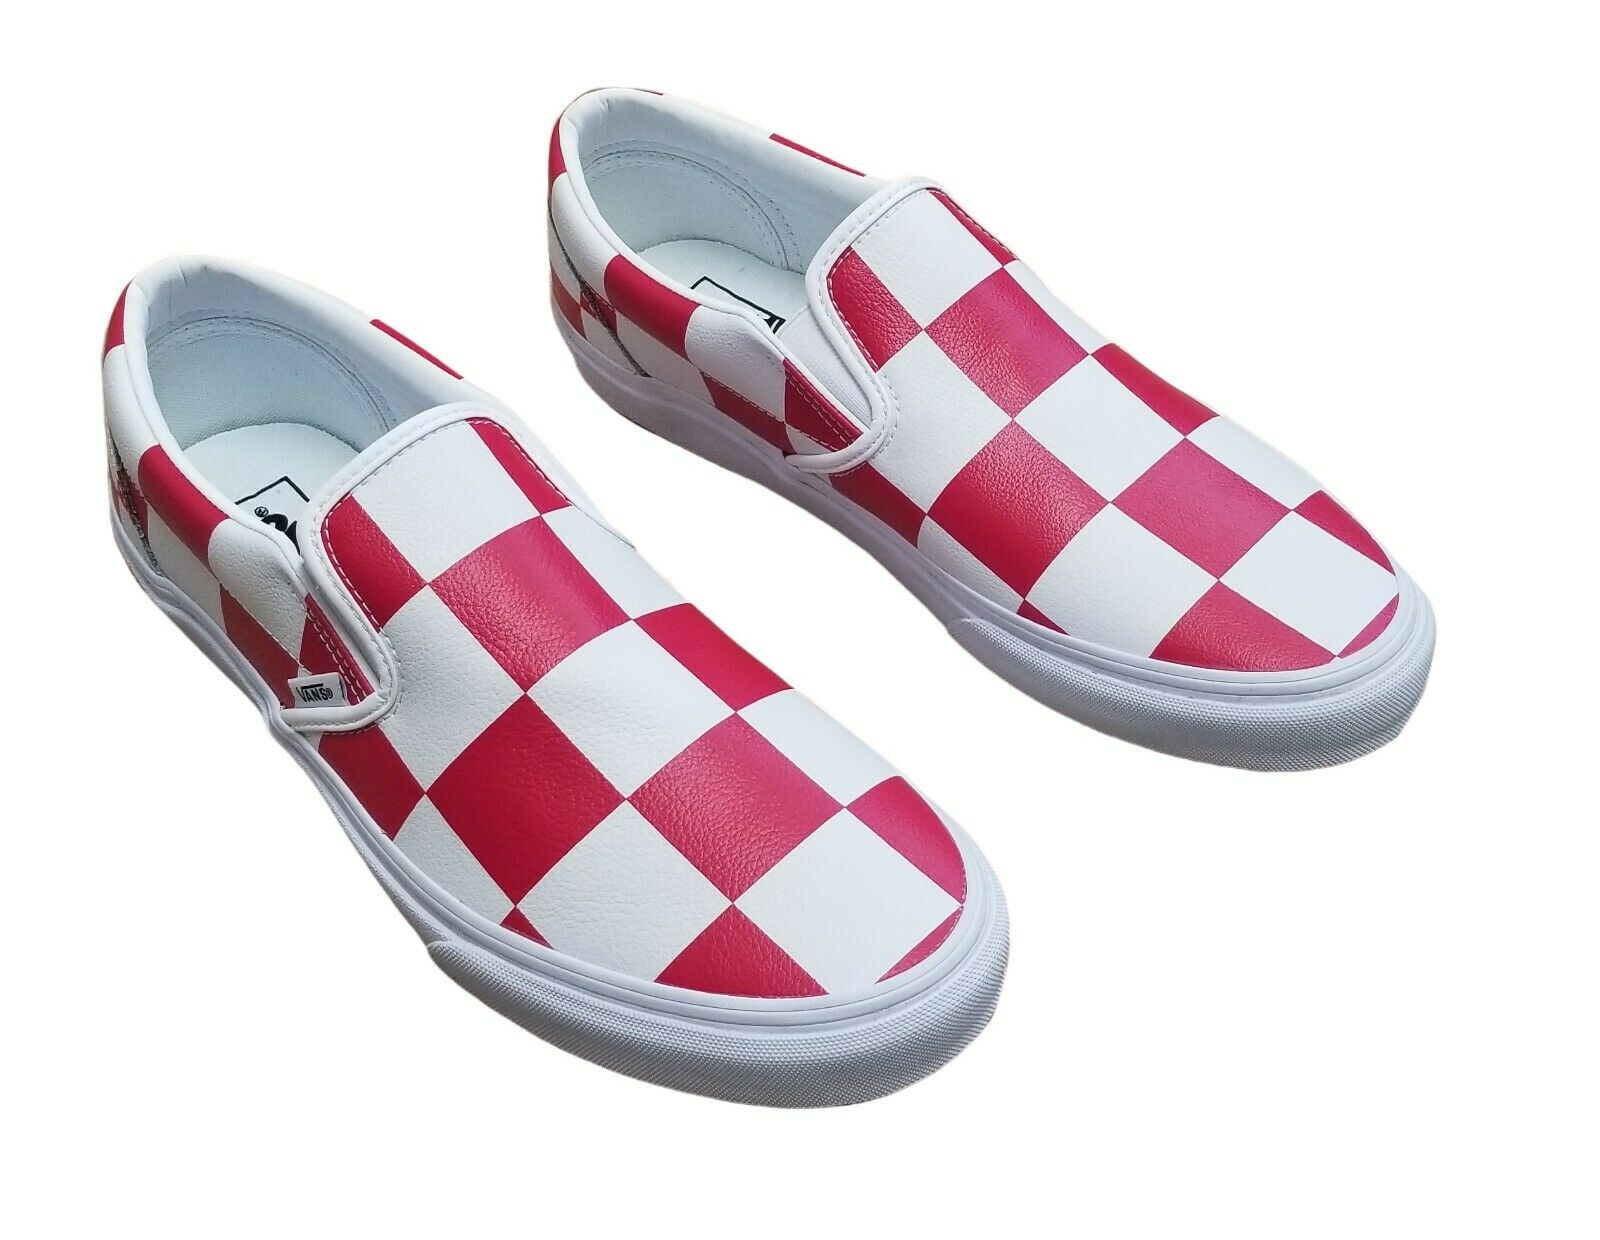 Vans Classic Slip On Leather Checker True White/Red Men's Skate Shoes Size 9.5 - image 1 of 2